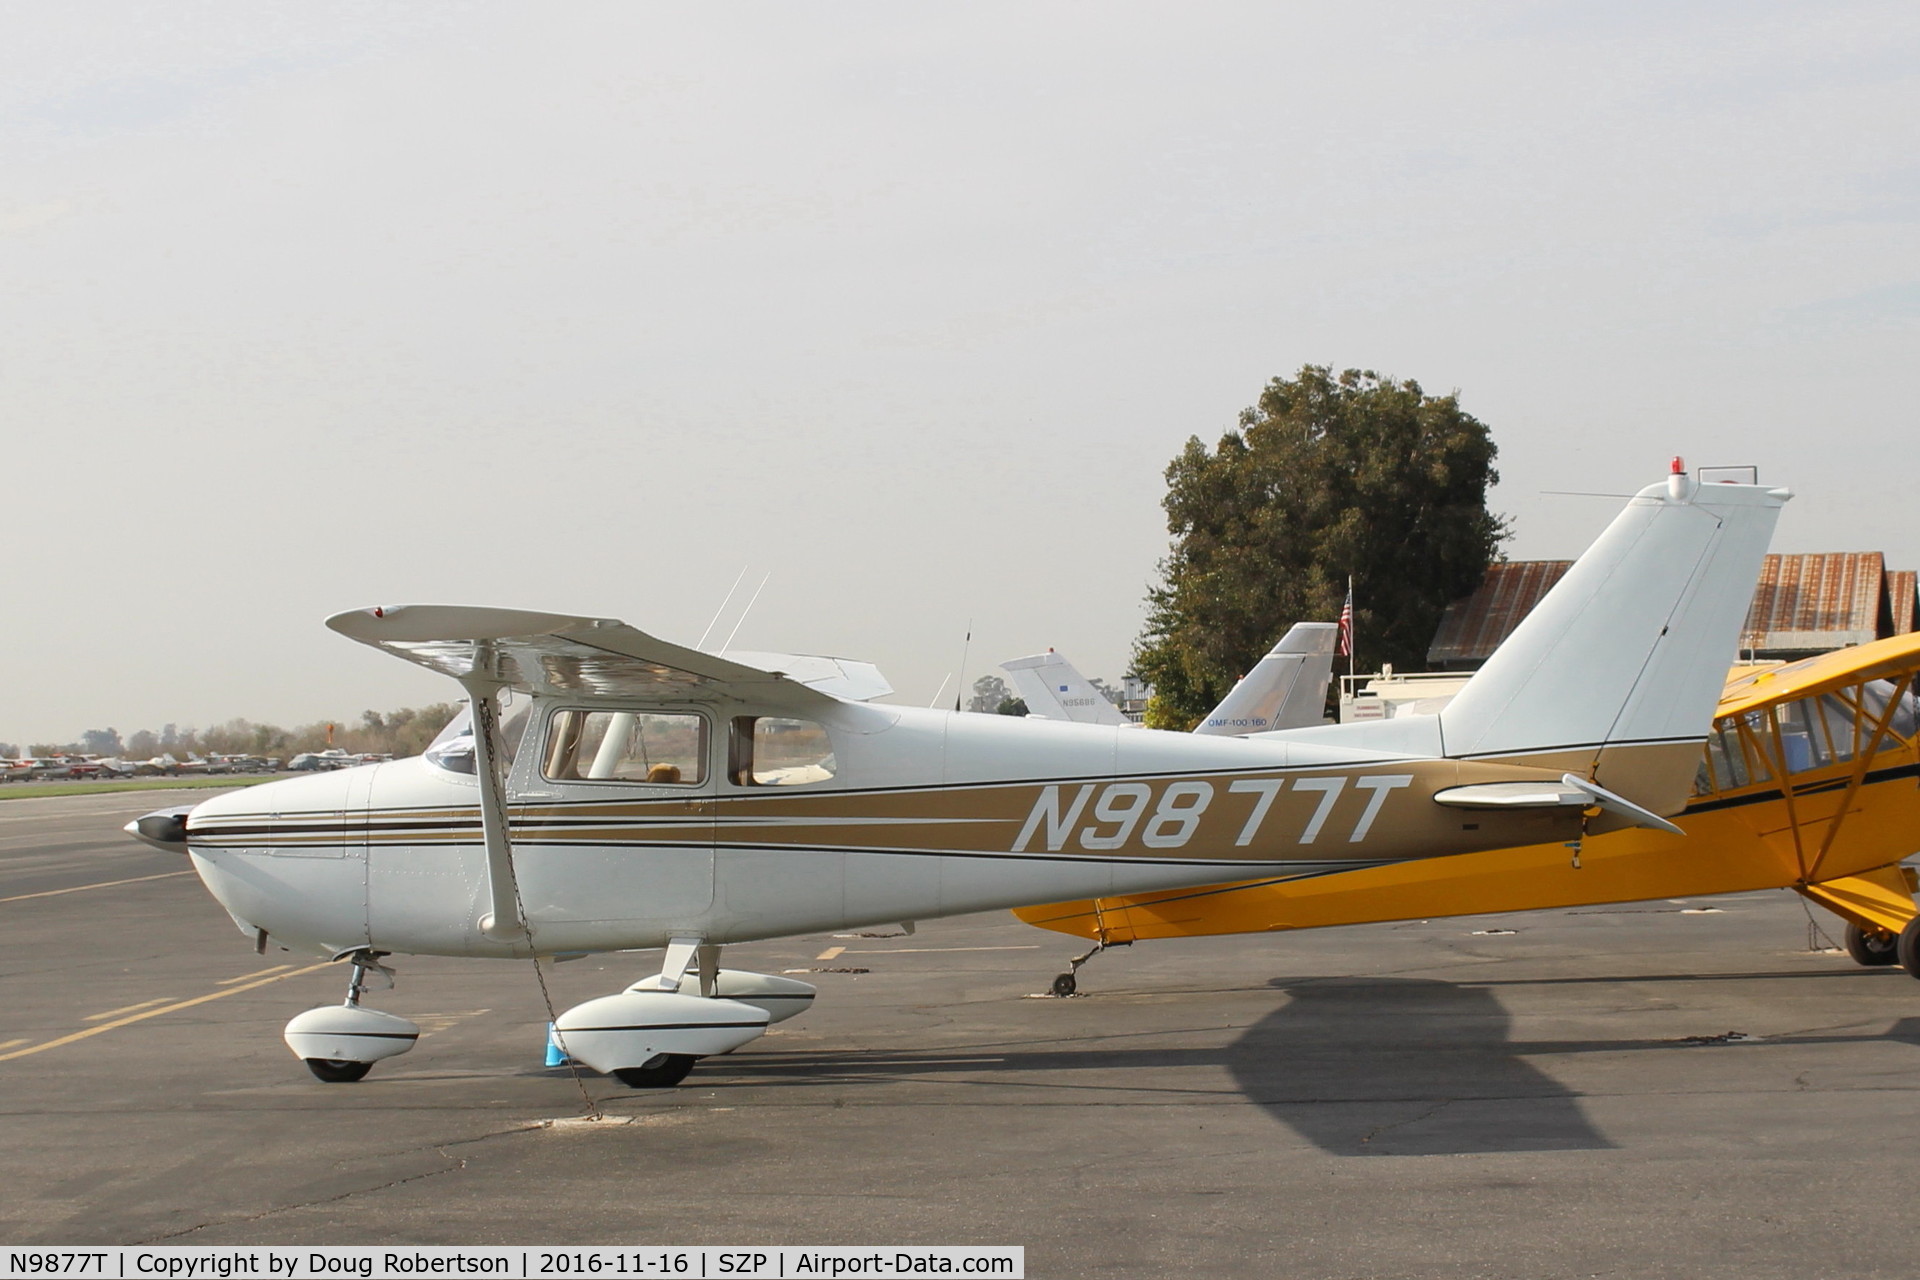 N9877T, 1960 Cessna 172A C/N 47677, 1960 Cessna 172A, Continental O-300 145 Hp 6 cylinder, the 172A was first 172 with sweptback fin and rudder. Name Skyhawk not used by Cessna until 1976 model.